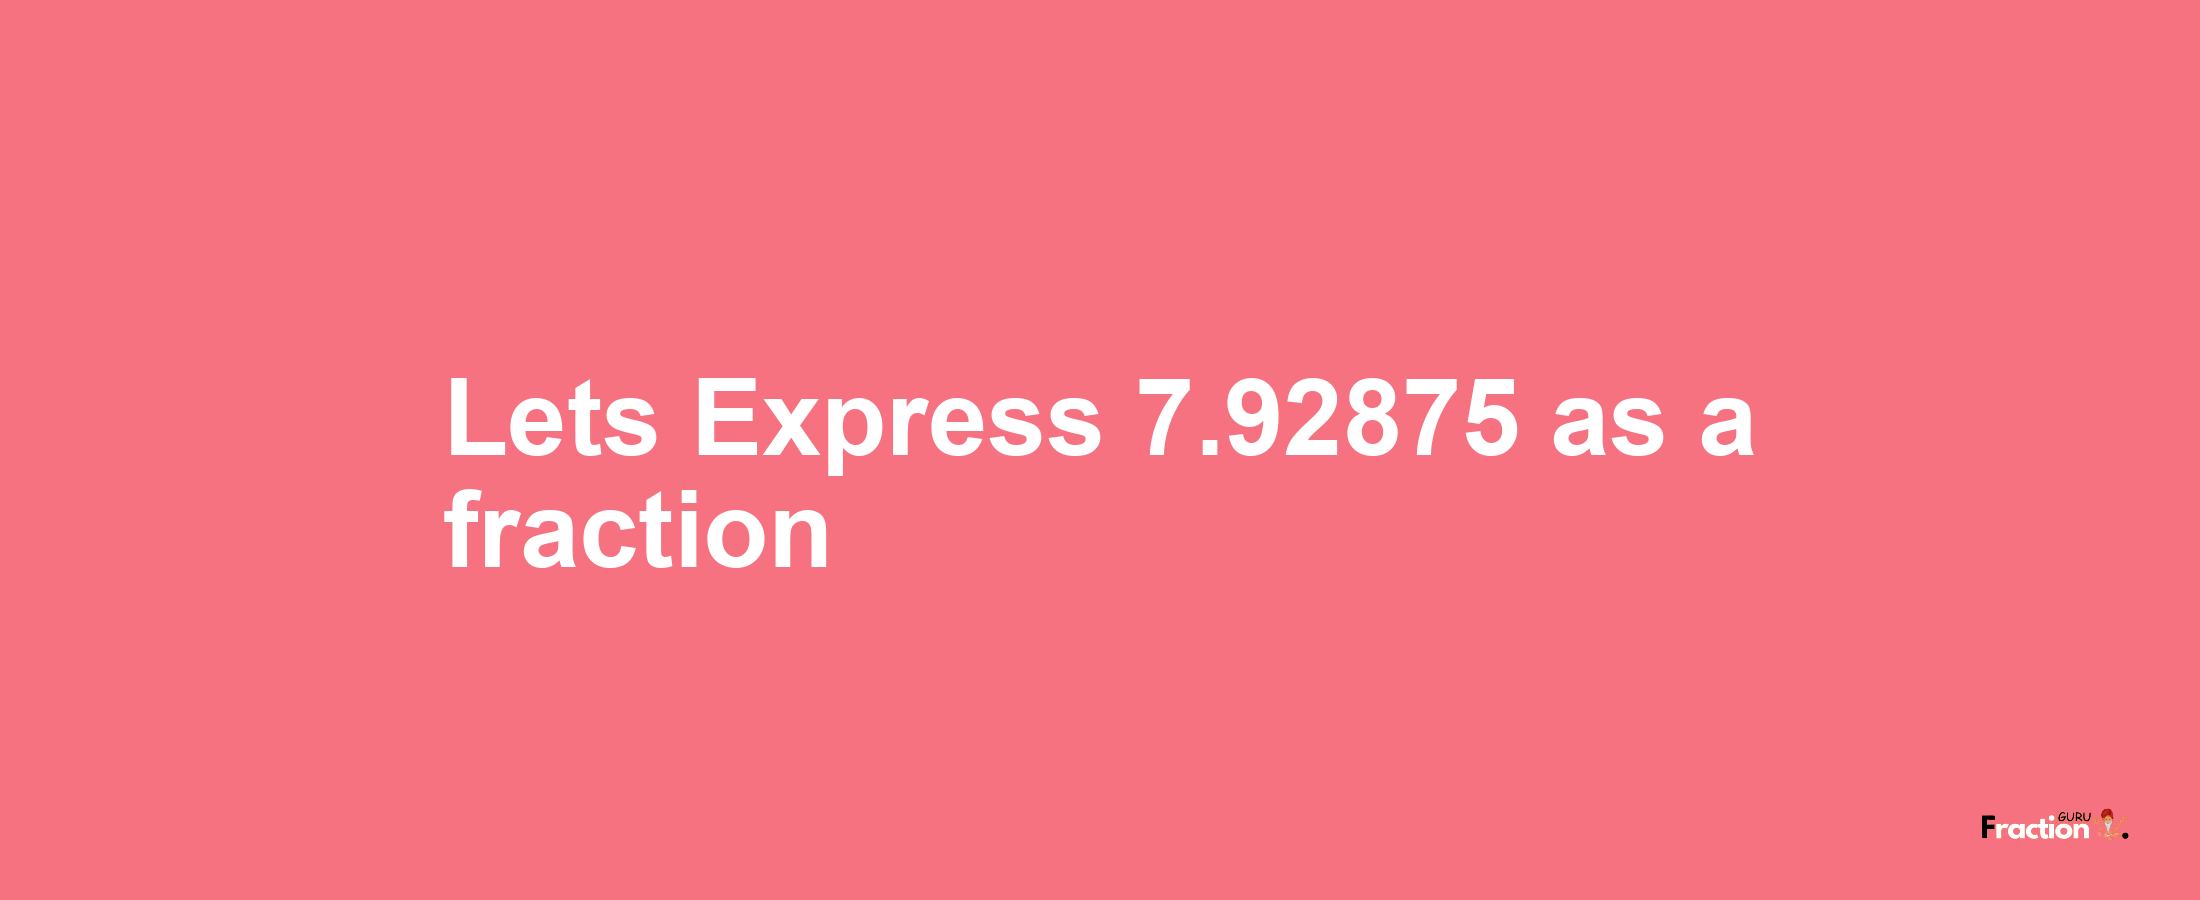 Lets Express 7.92875 as afraction